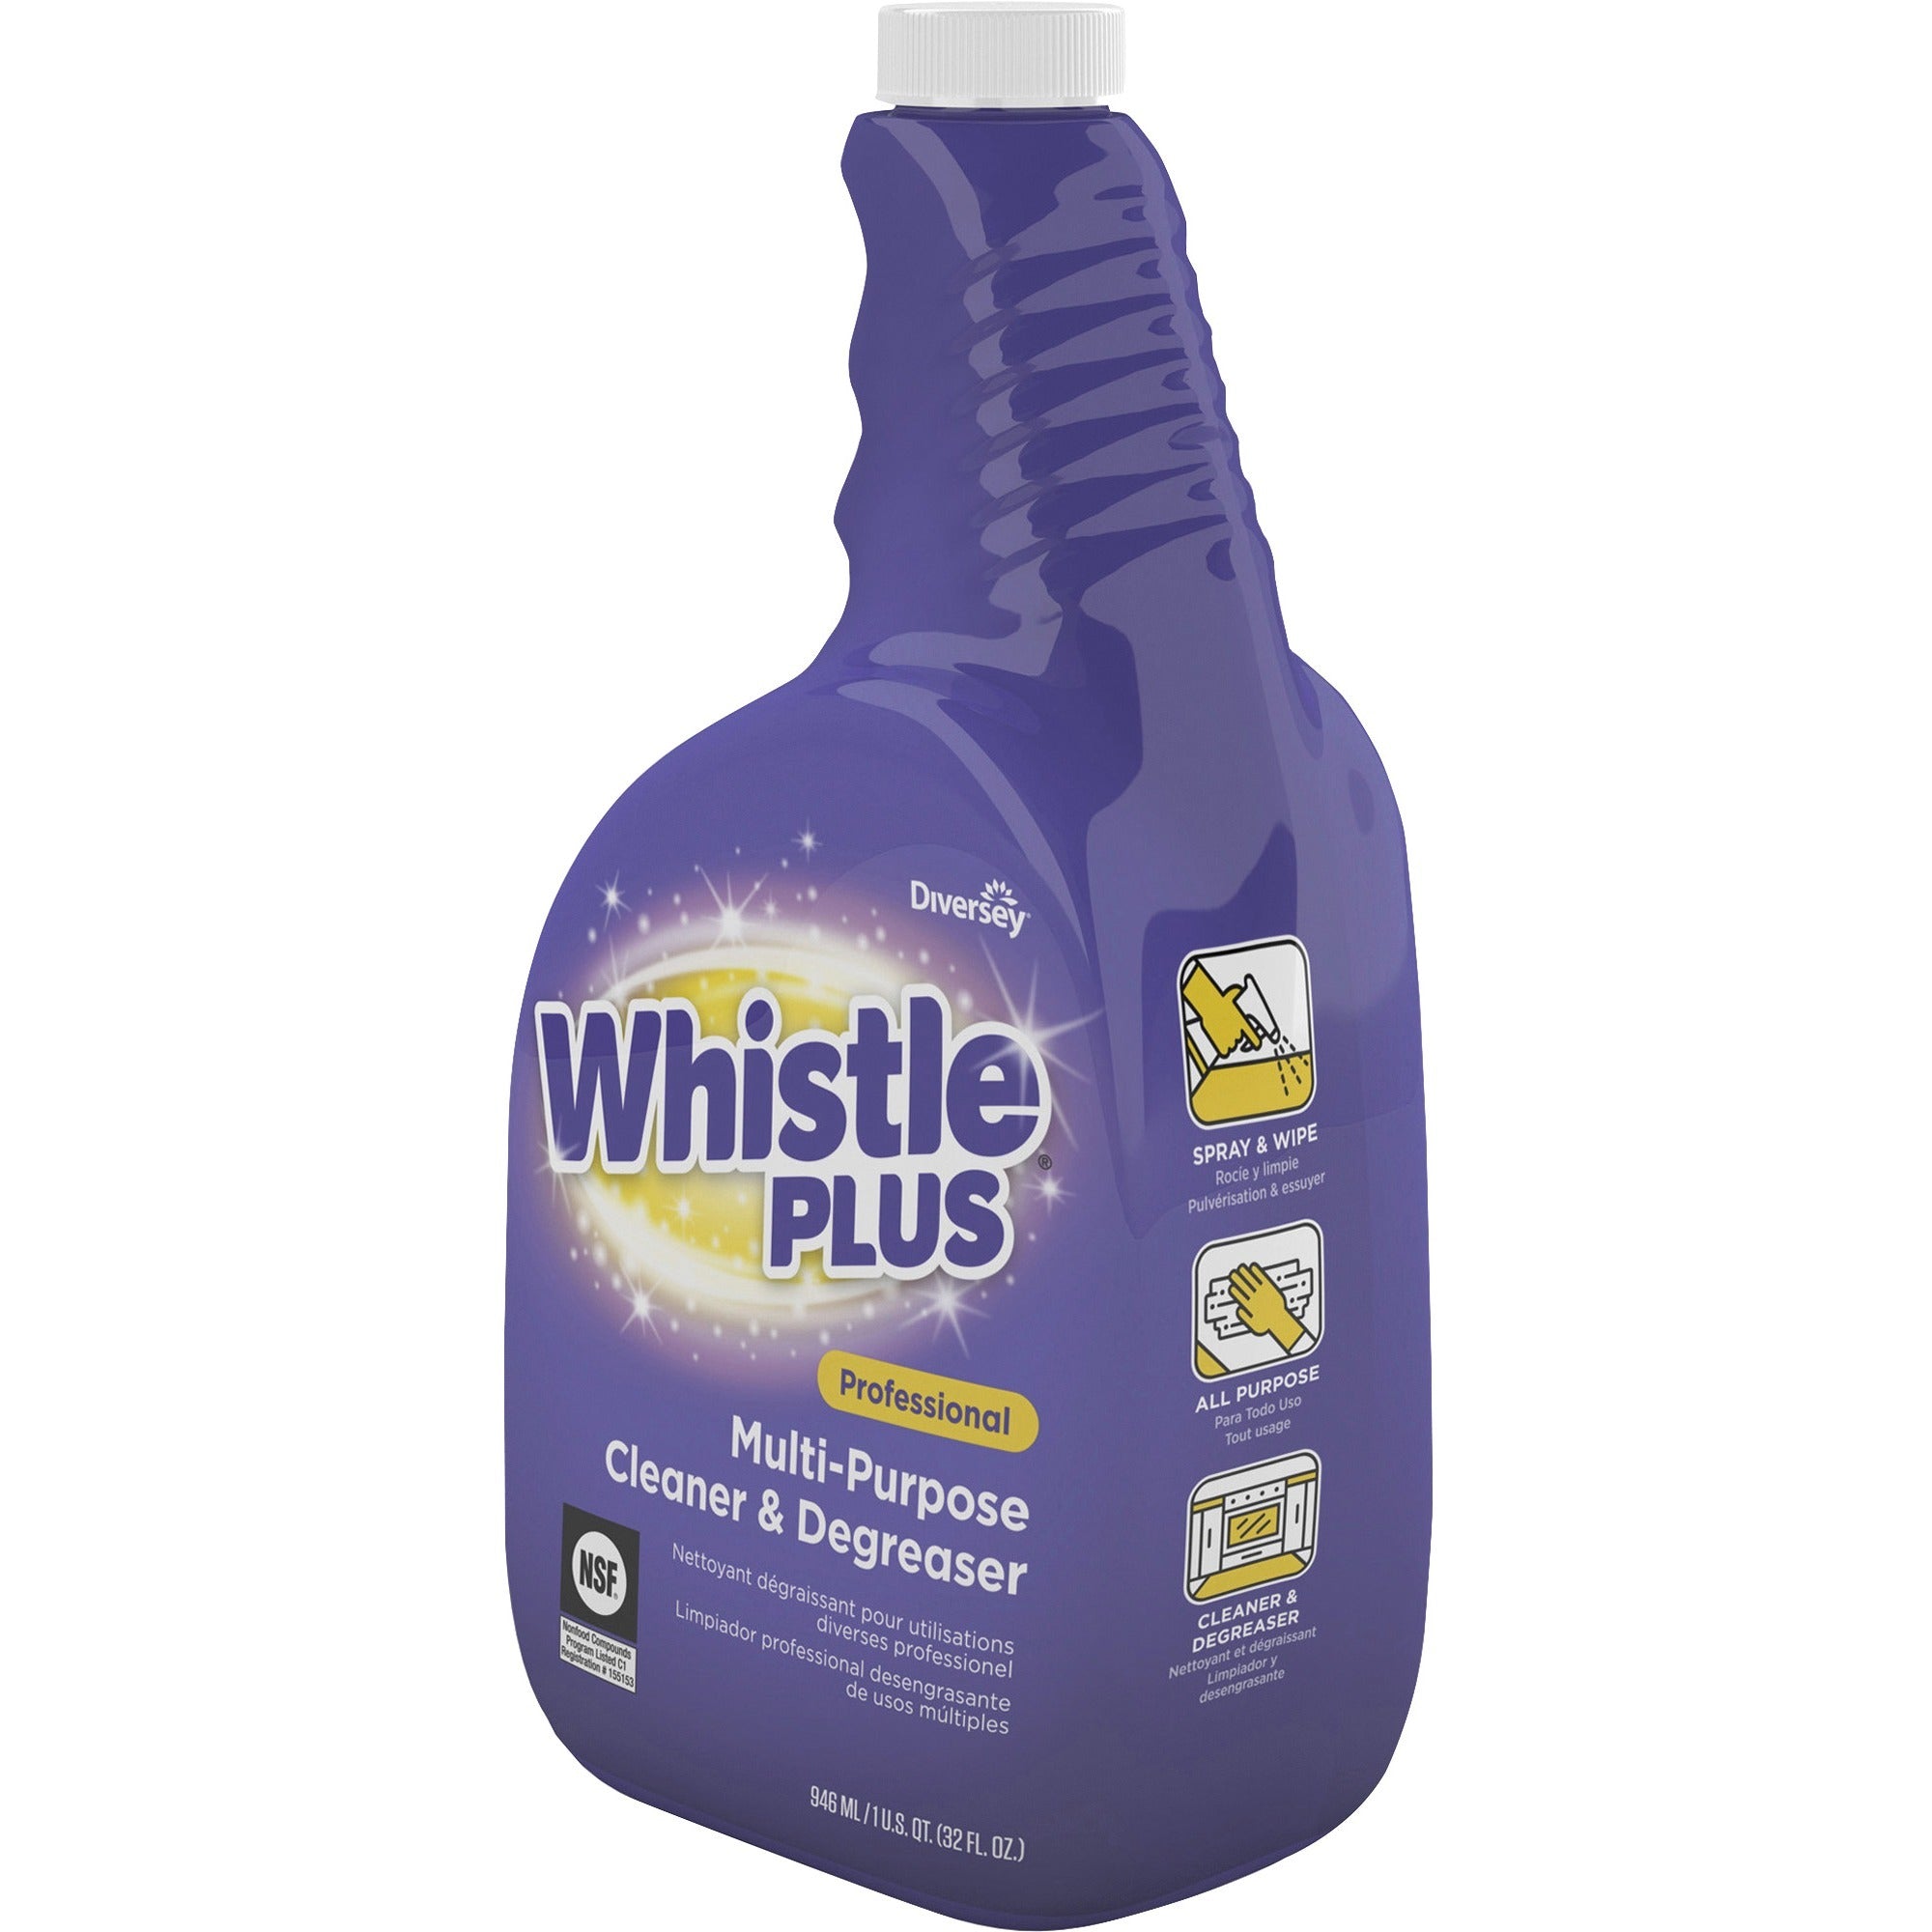 diversey-whistle-plus-cleaner-&-degreaser-ready-to-use-32-fl-oz-1-quart-citrus-scent-4-carton-heavy-duty-easy-to-use-rinse-free-non-streaking-phosphate-free-purple_dvocbd540571ct - 2